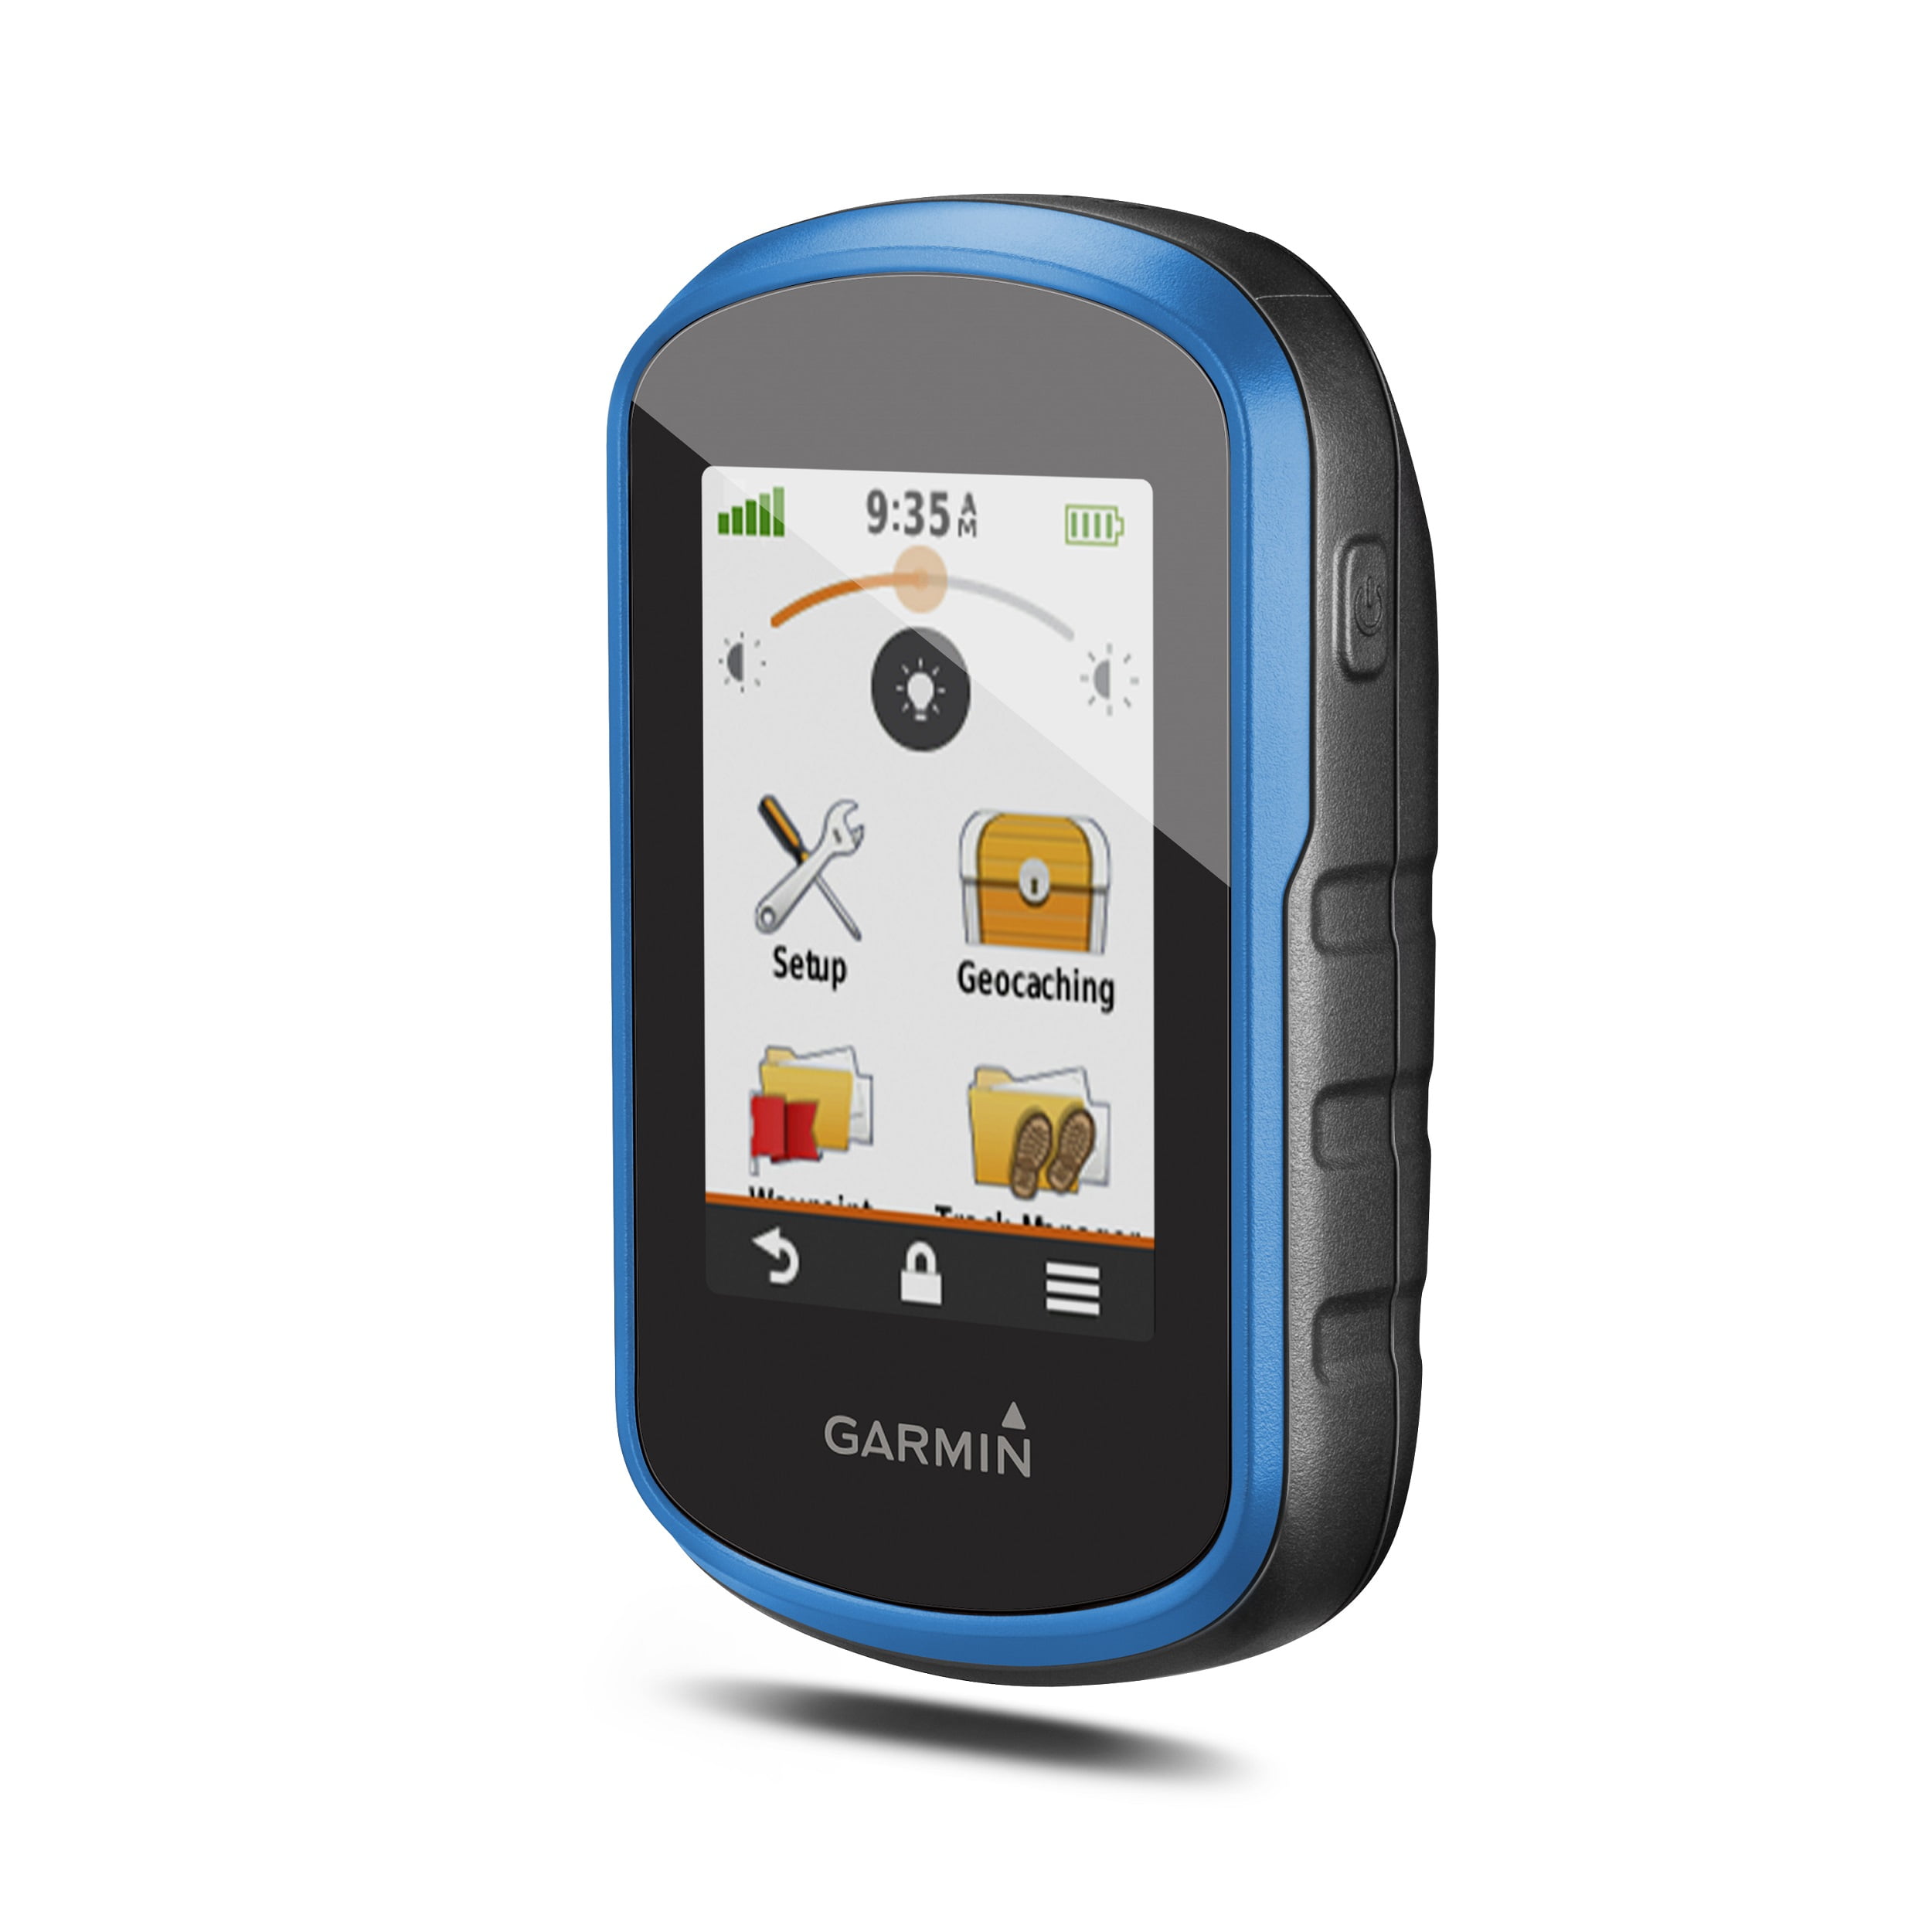 Garmin eTrex Touch 25 Handheld Outdoor Hiking GPS with Touchscreen 010-01325-00 